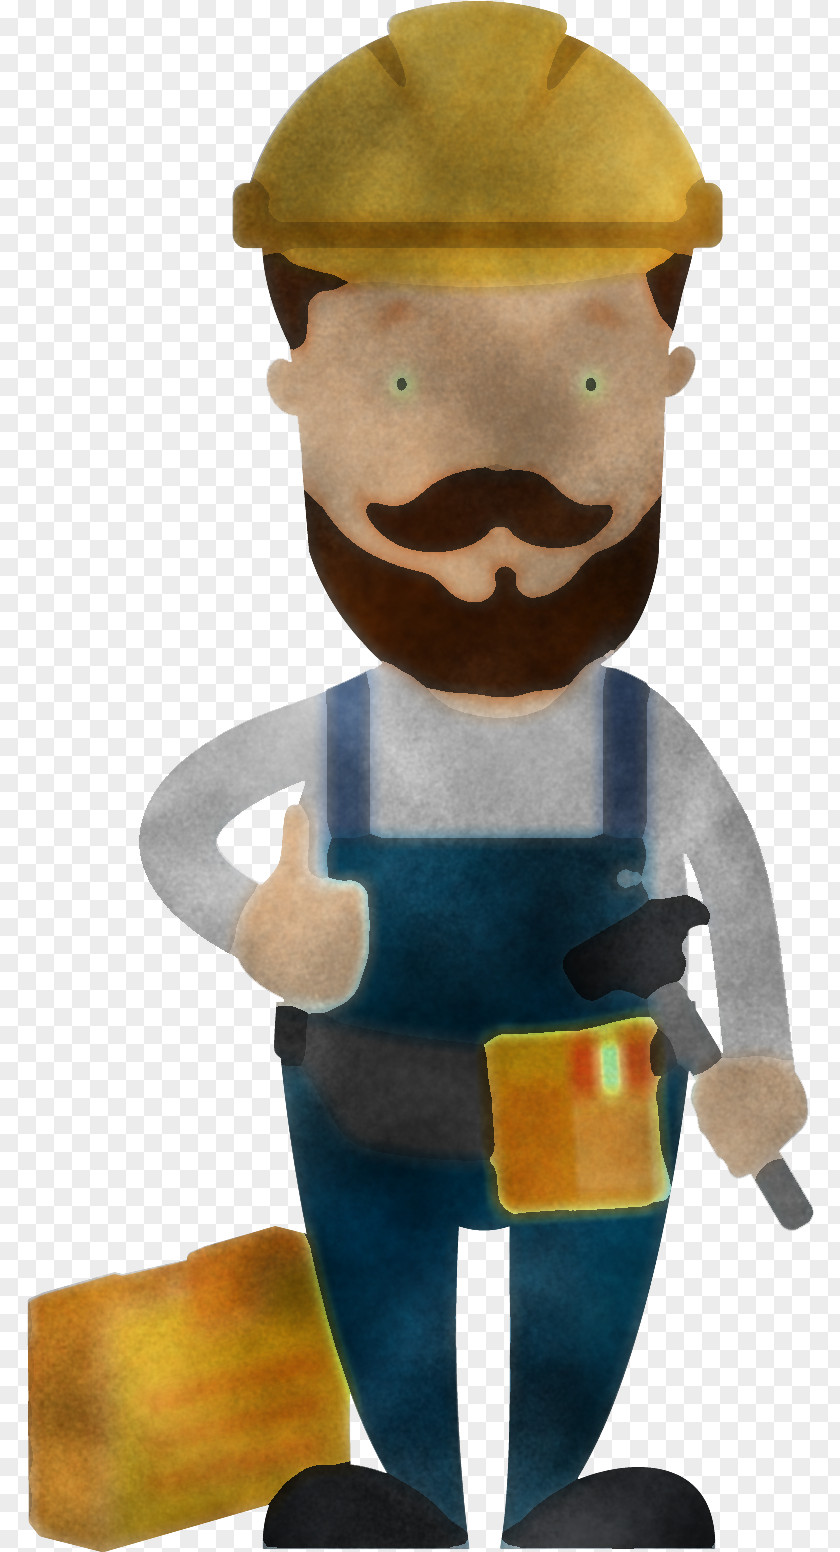 Cartoon Toy Figurine Animation Cook PNG